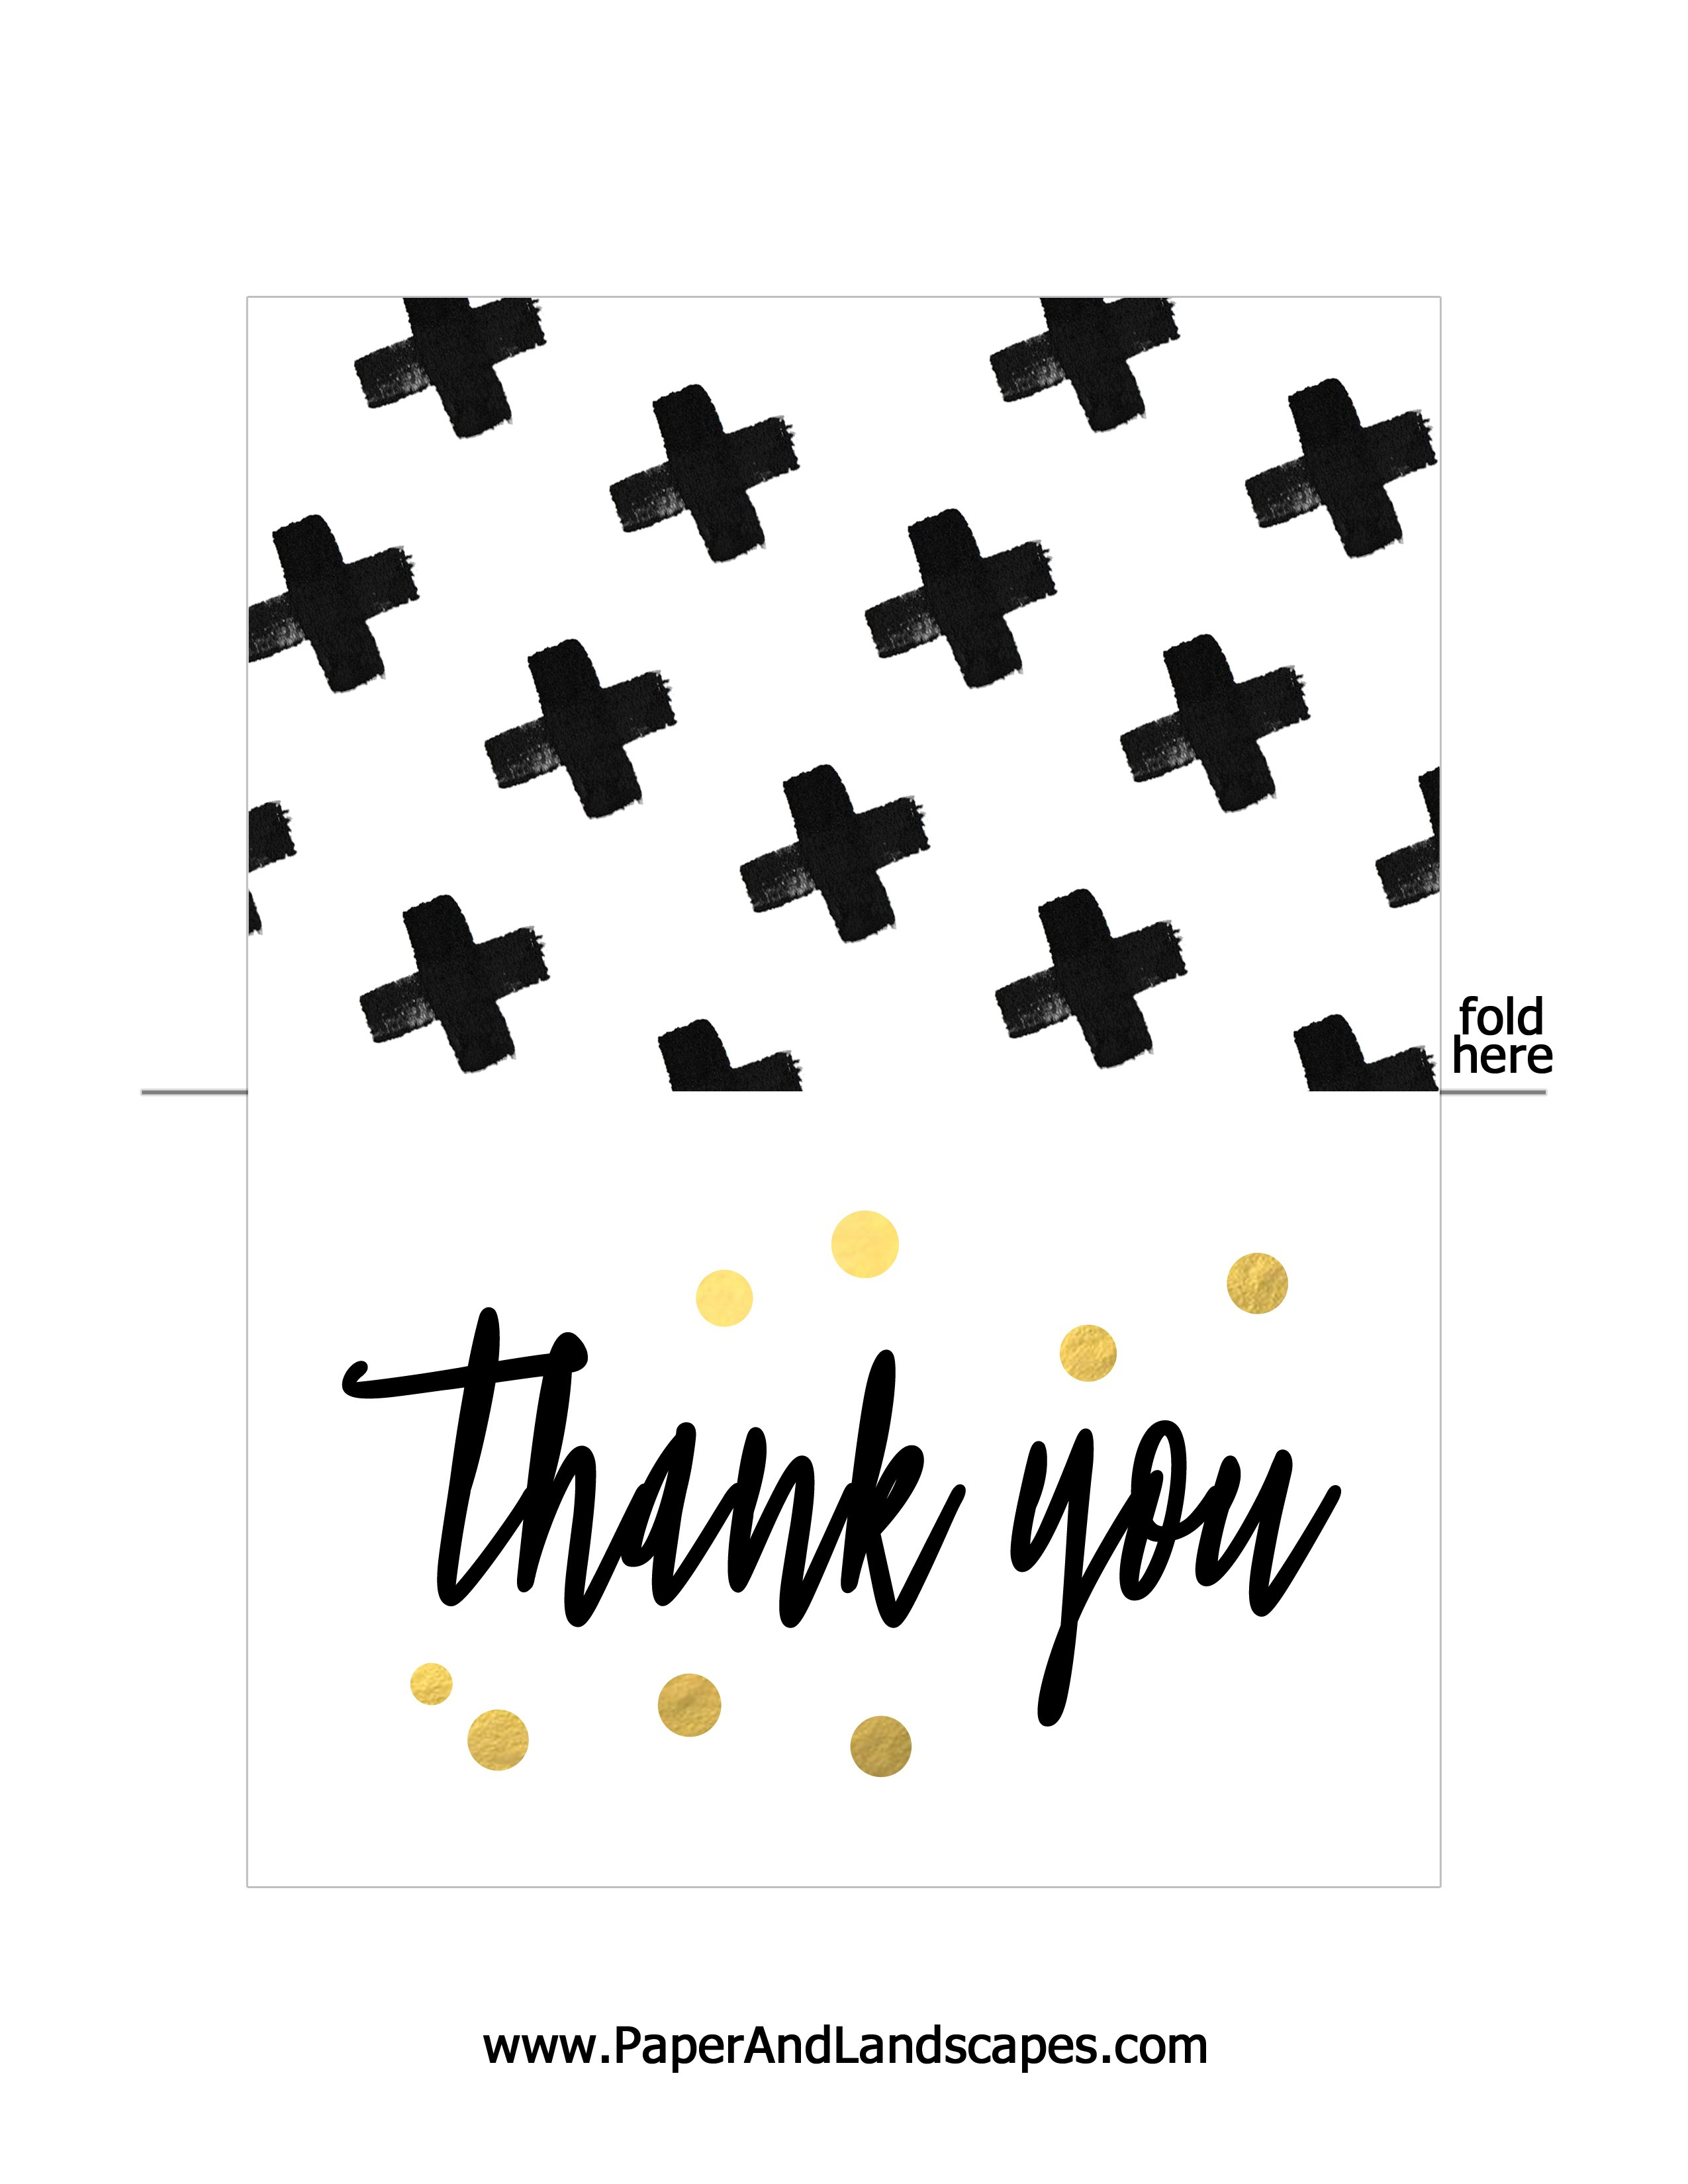 Free Printable Thank You Cards - Paper And Landscapes - Free Printable Thank You Cards